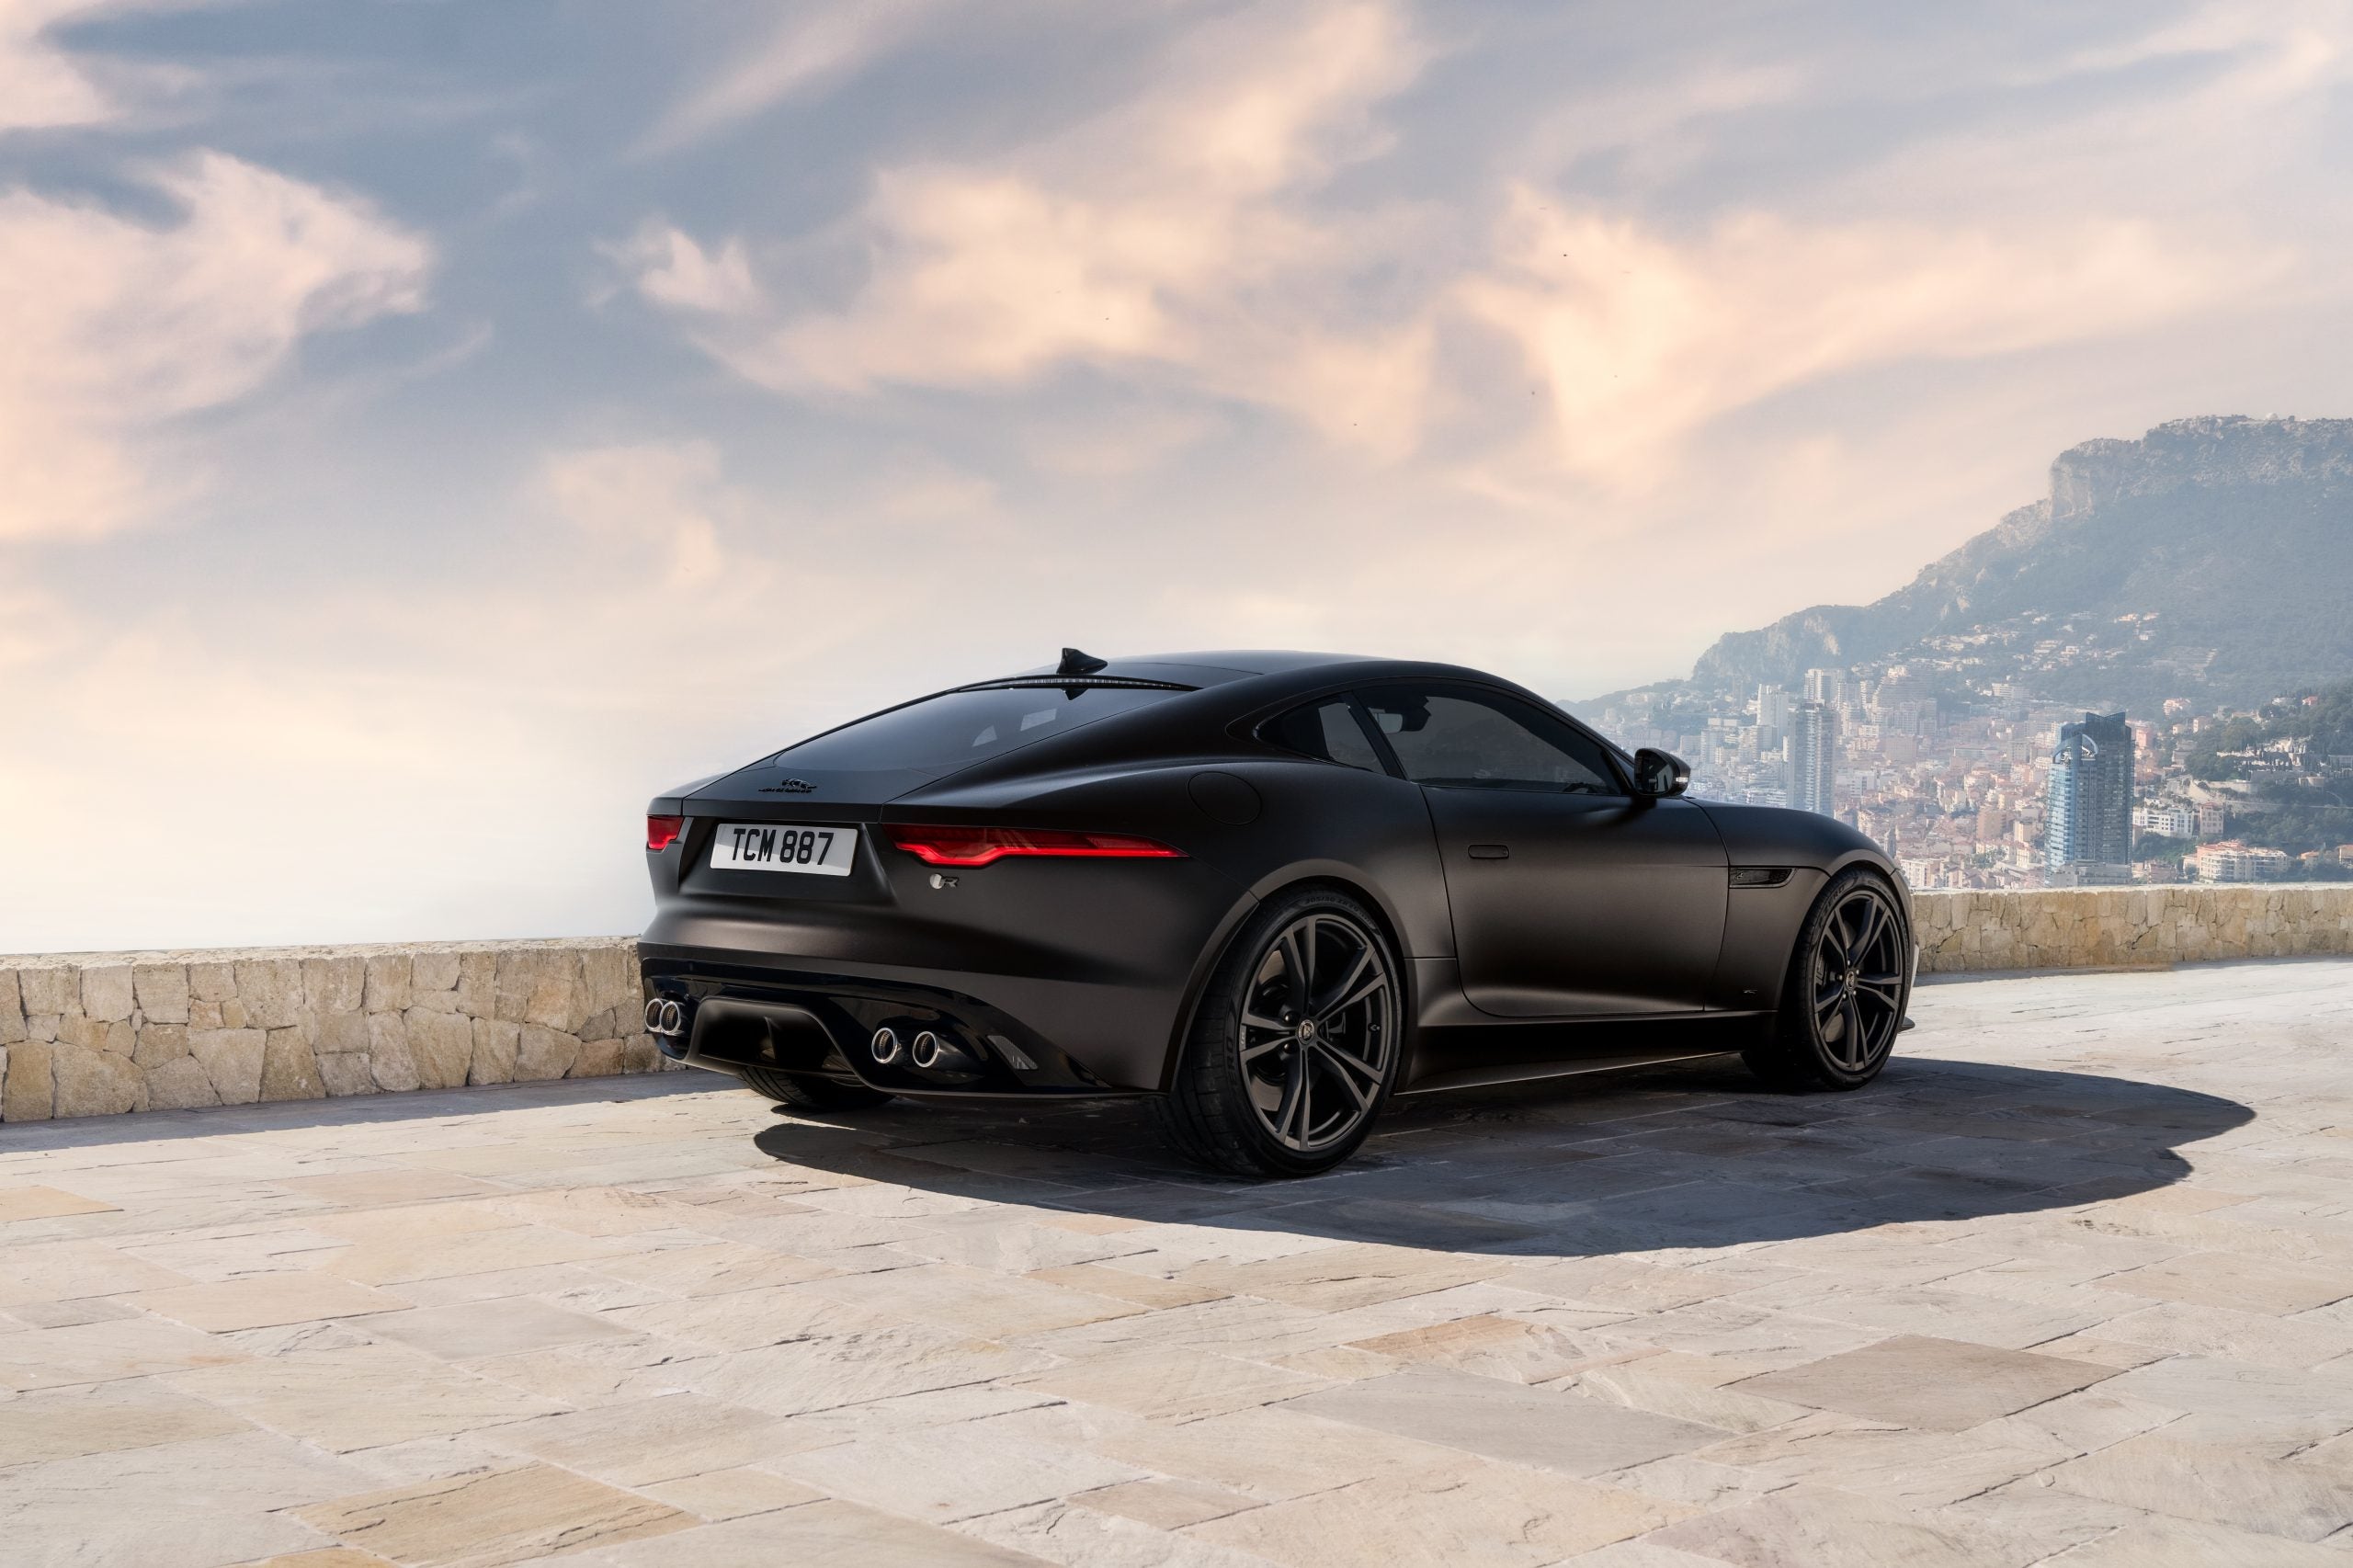 I Traveled To The South Of France To Test Jaguar's Last F-TYPE Sports Car And It Was Peak Luxury